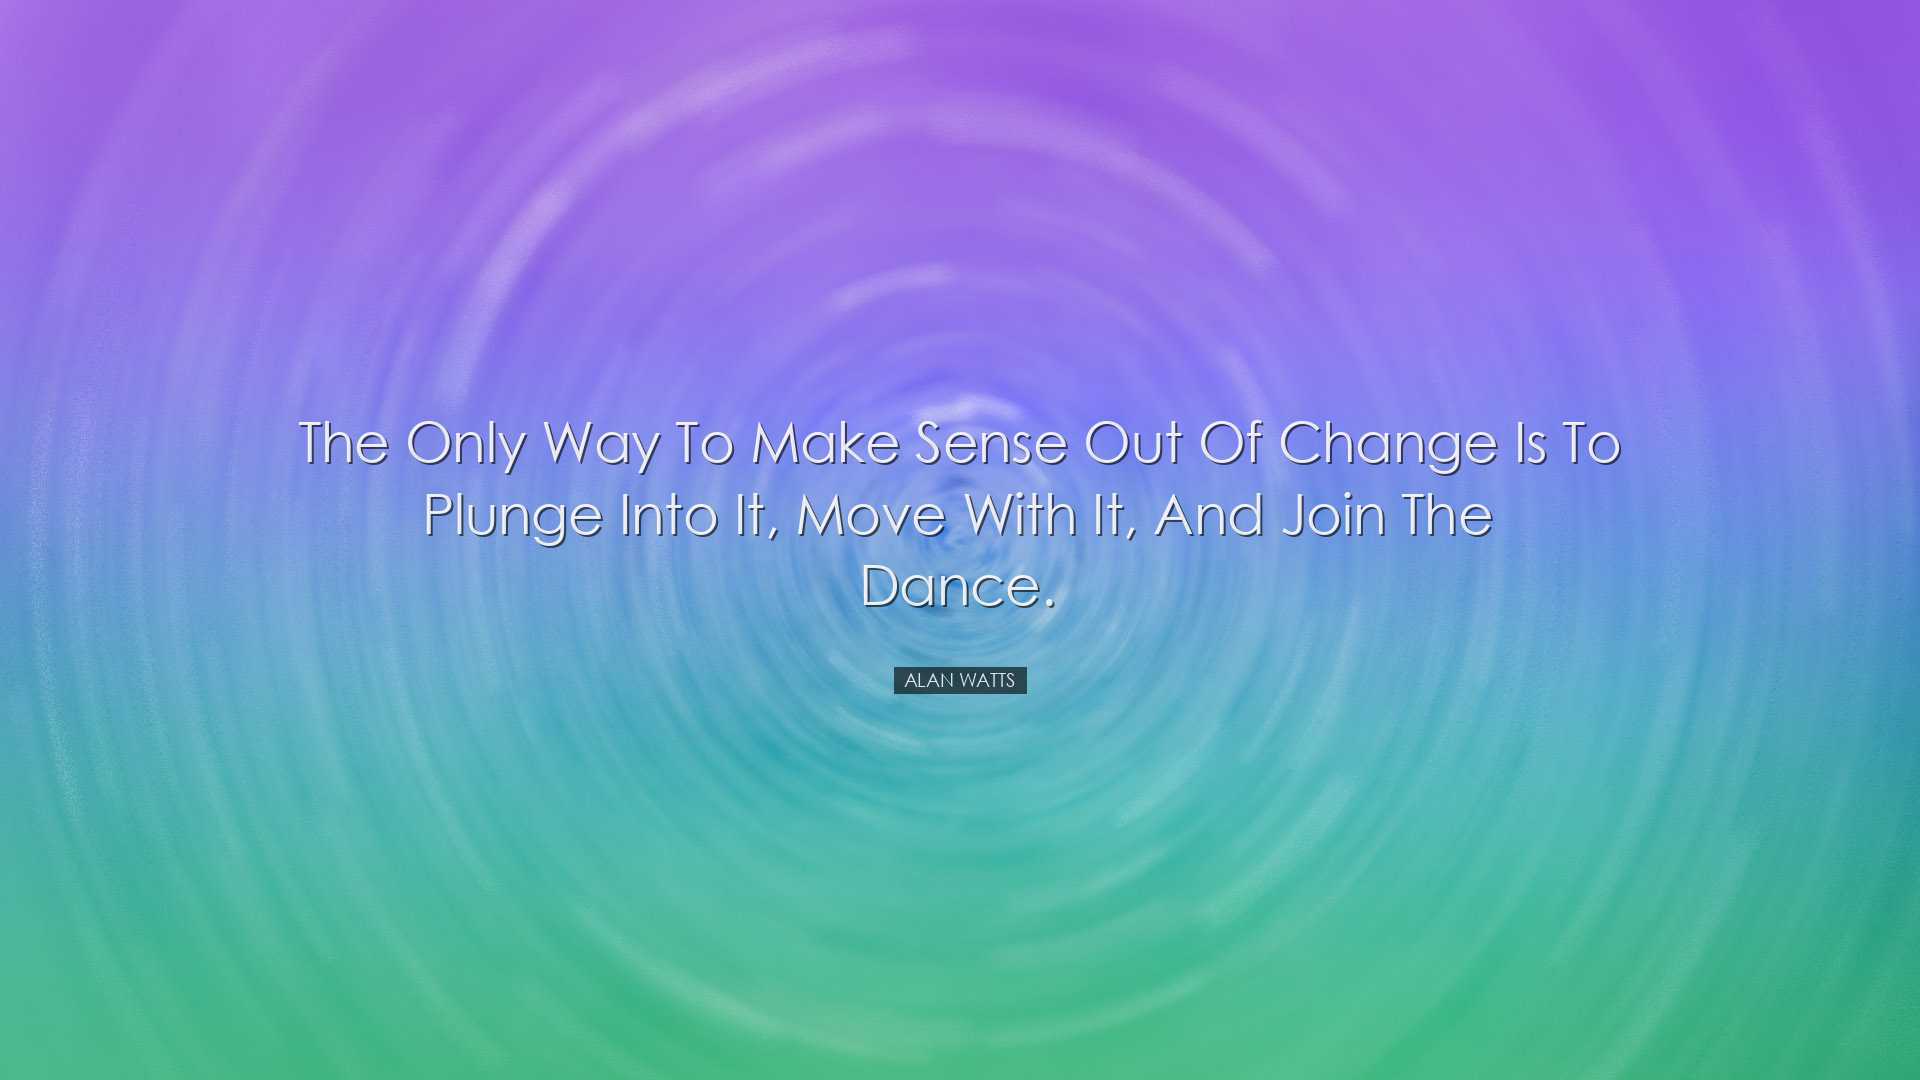 The only way to make sense out of change is to plunge into it, mov